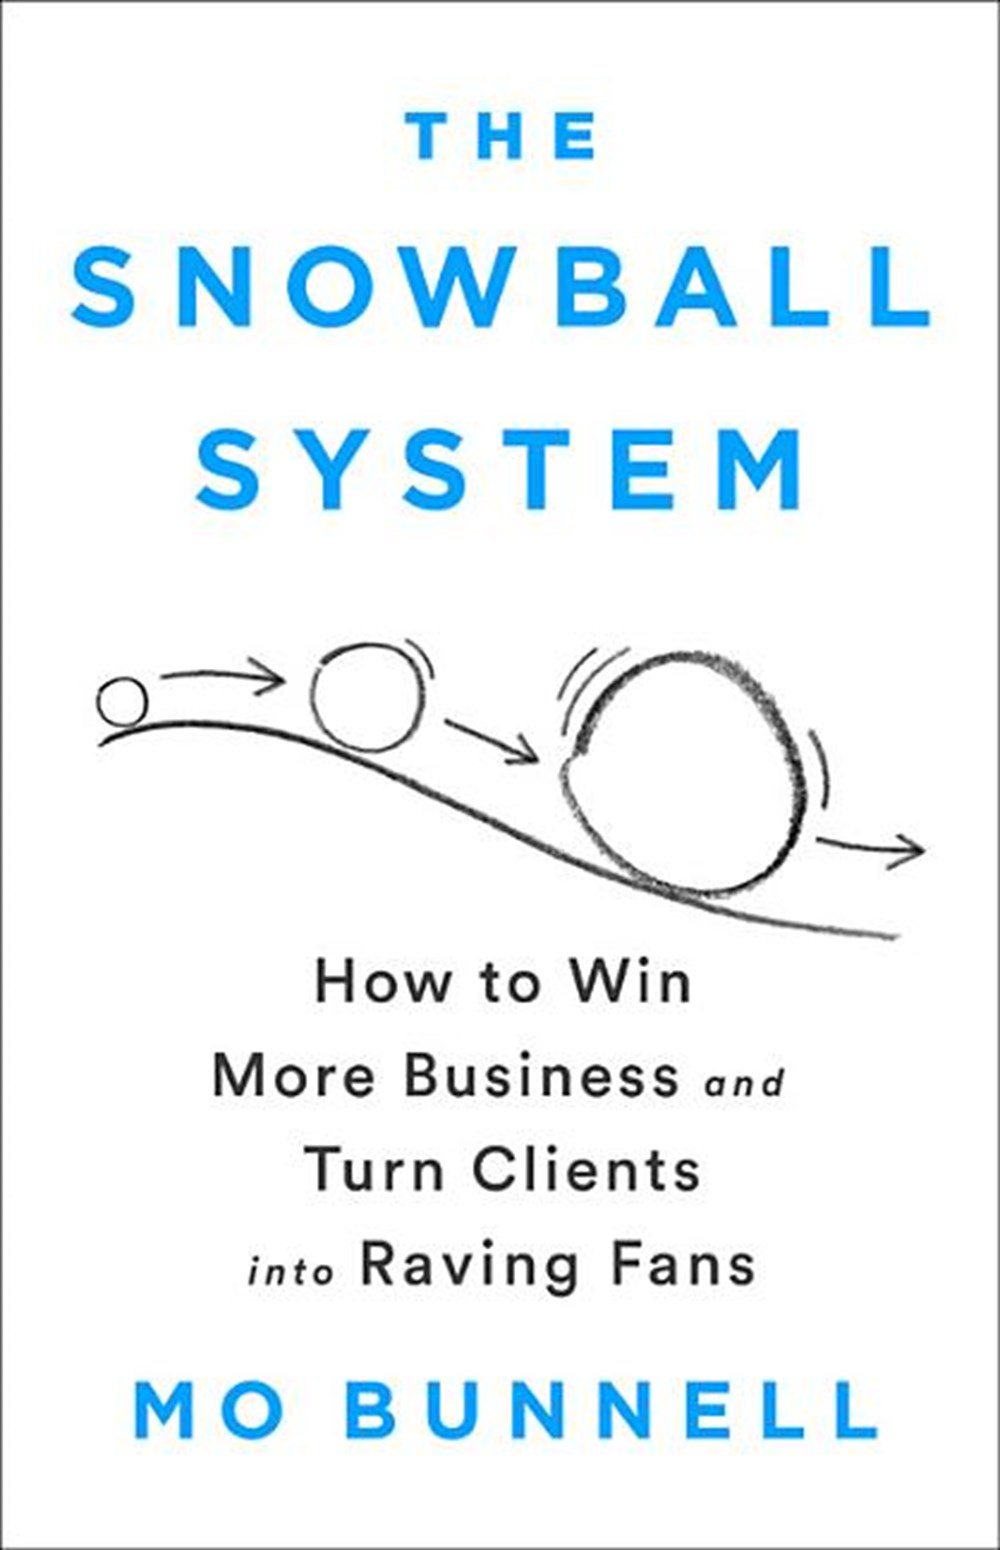 Snowball System: How to Win More Business and Turn Clients Into Raving Fans